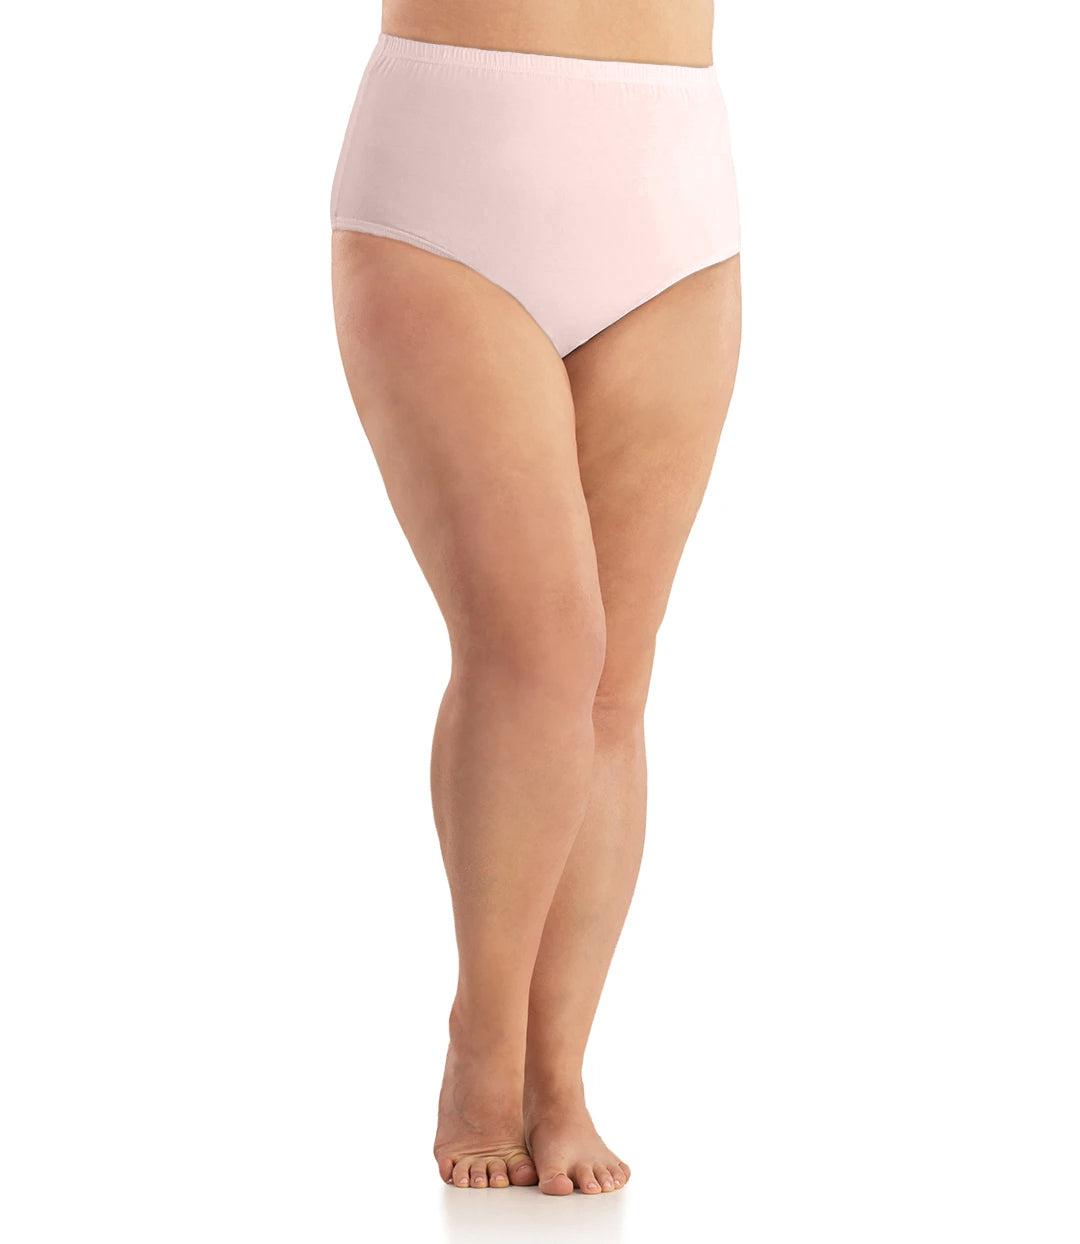 Bottom half of plus sized woman, facing front, wearing JunoActive Junowear Cotton Stretch Classic Full Fit Brief in light pink. This brief has a high waist fit with conservative leg opening.